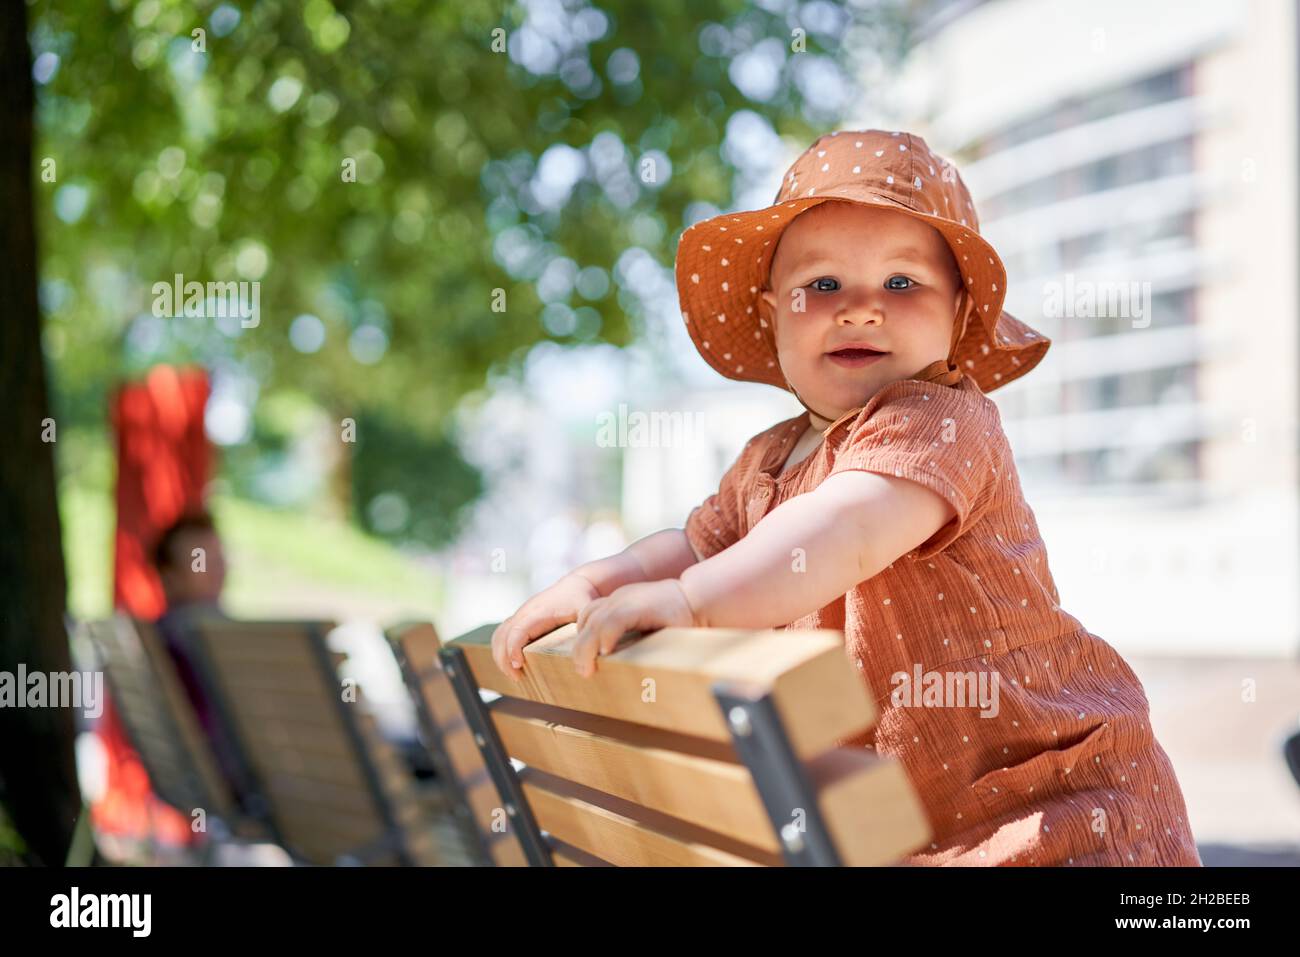 Portraits of a cute 10 months old baby girl. Walking on the playground, on a sunny summer day. Stock Photo